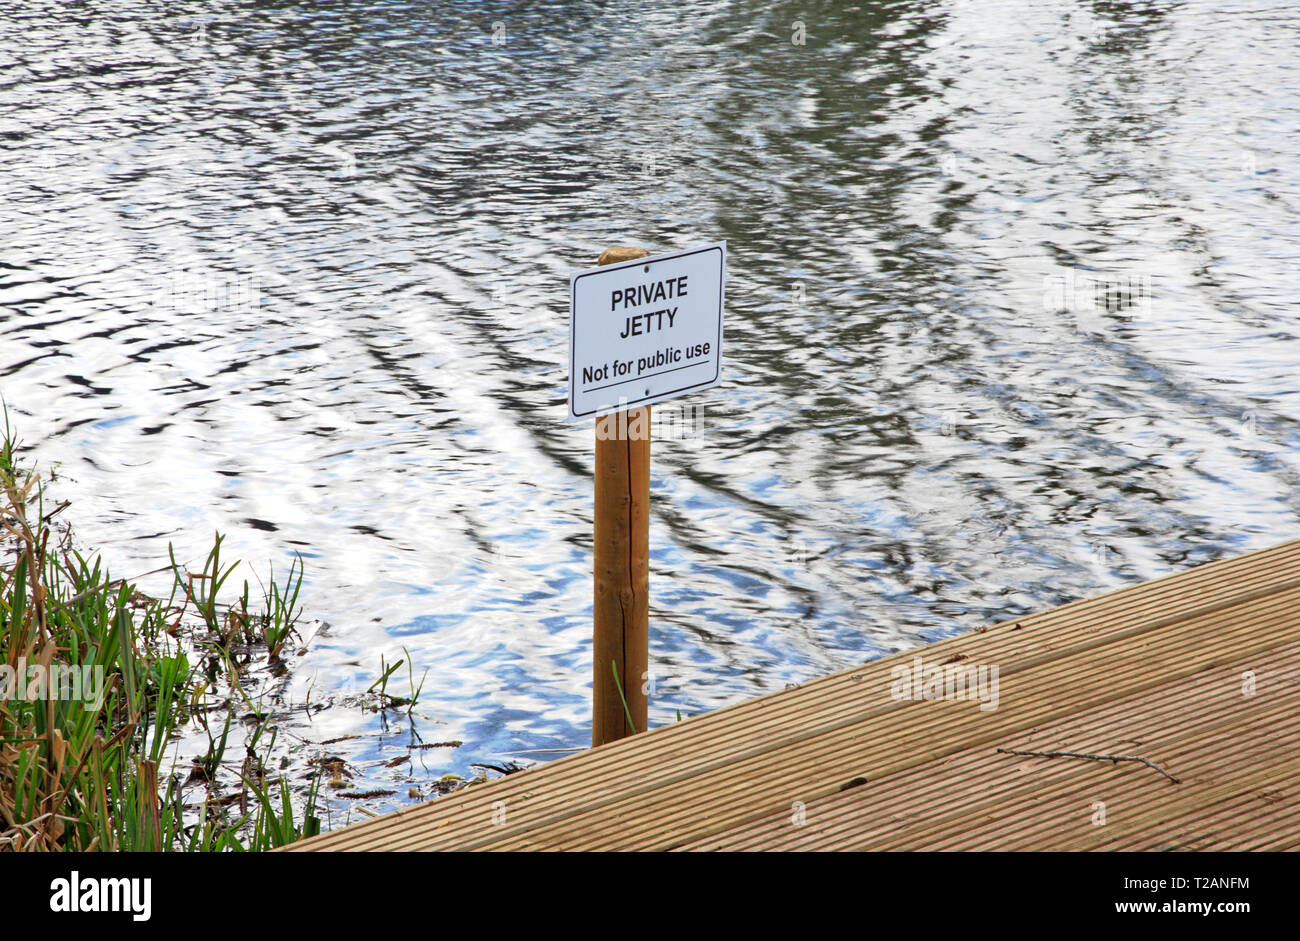 A Private Jetty sign by the River Bure upstream of Coltishall, Norfolk, England, United Kingdom, Europe. Stock Photo